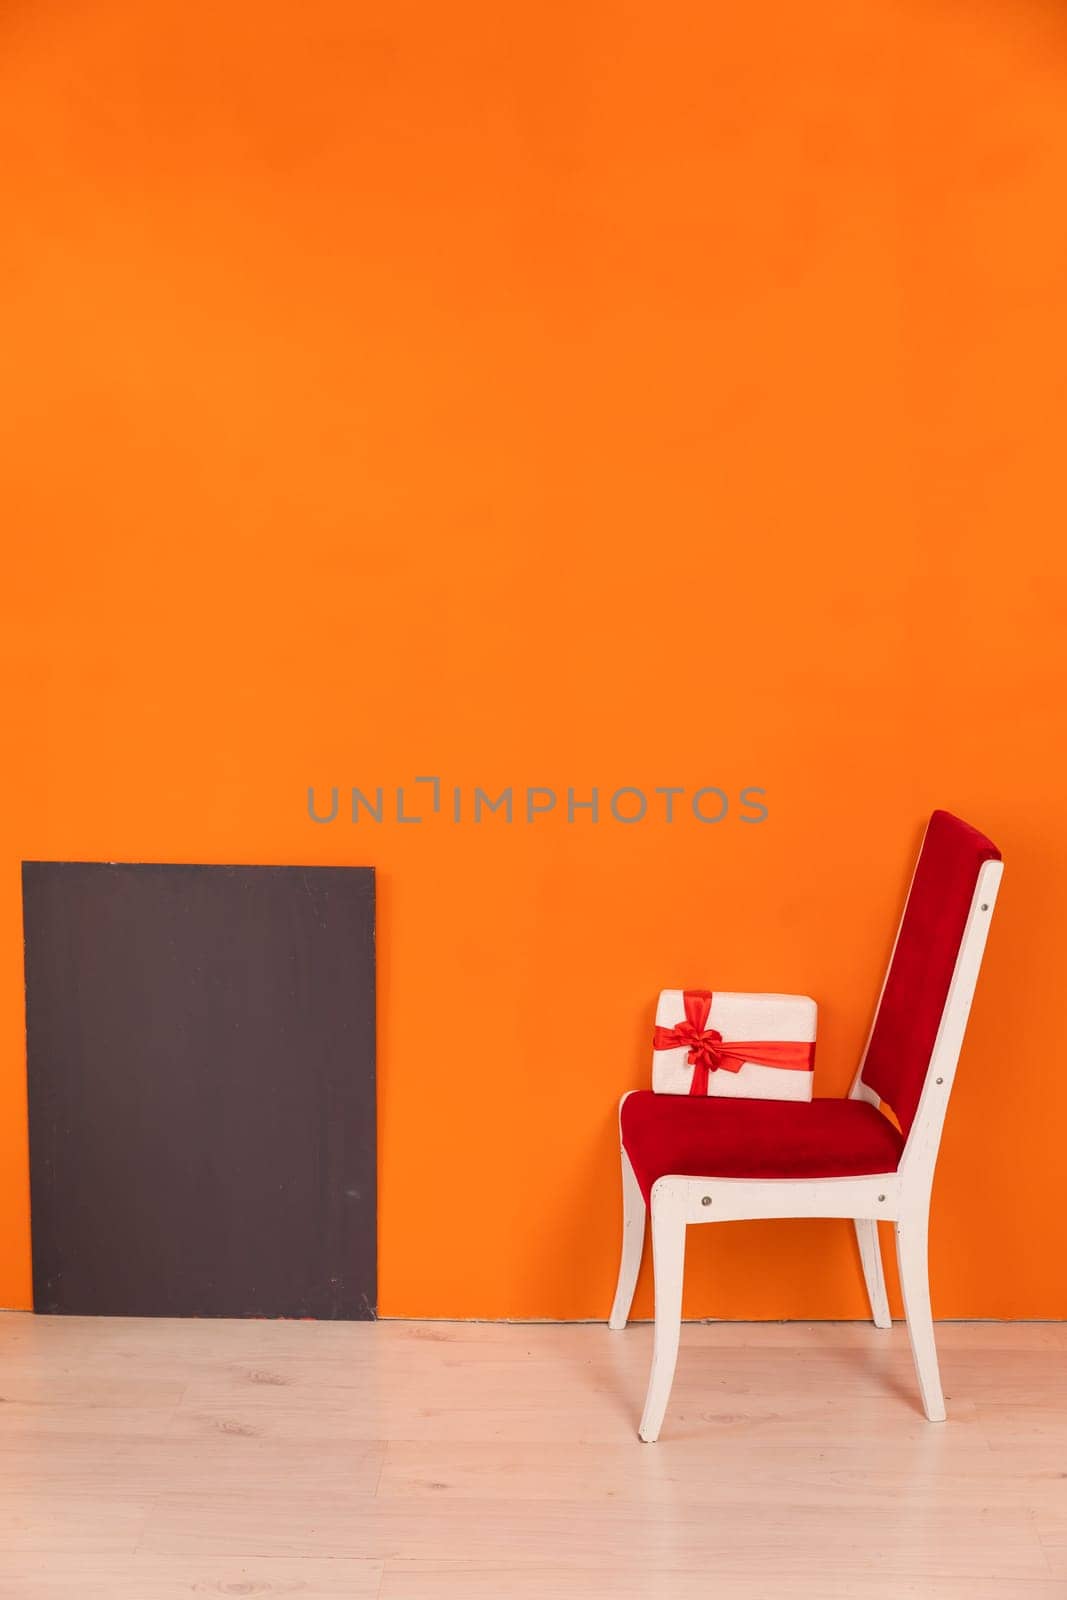 Chair With Holiday Gift Against Bright Colored Wall